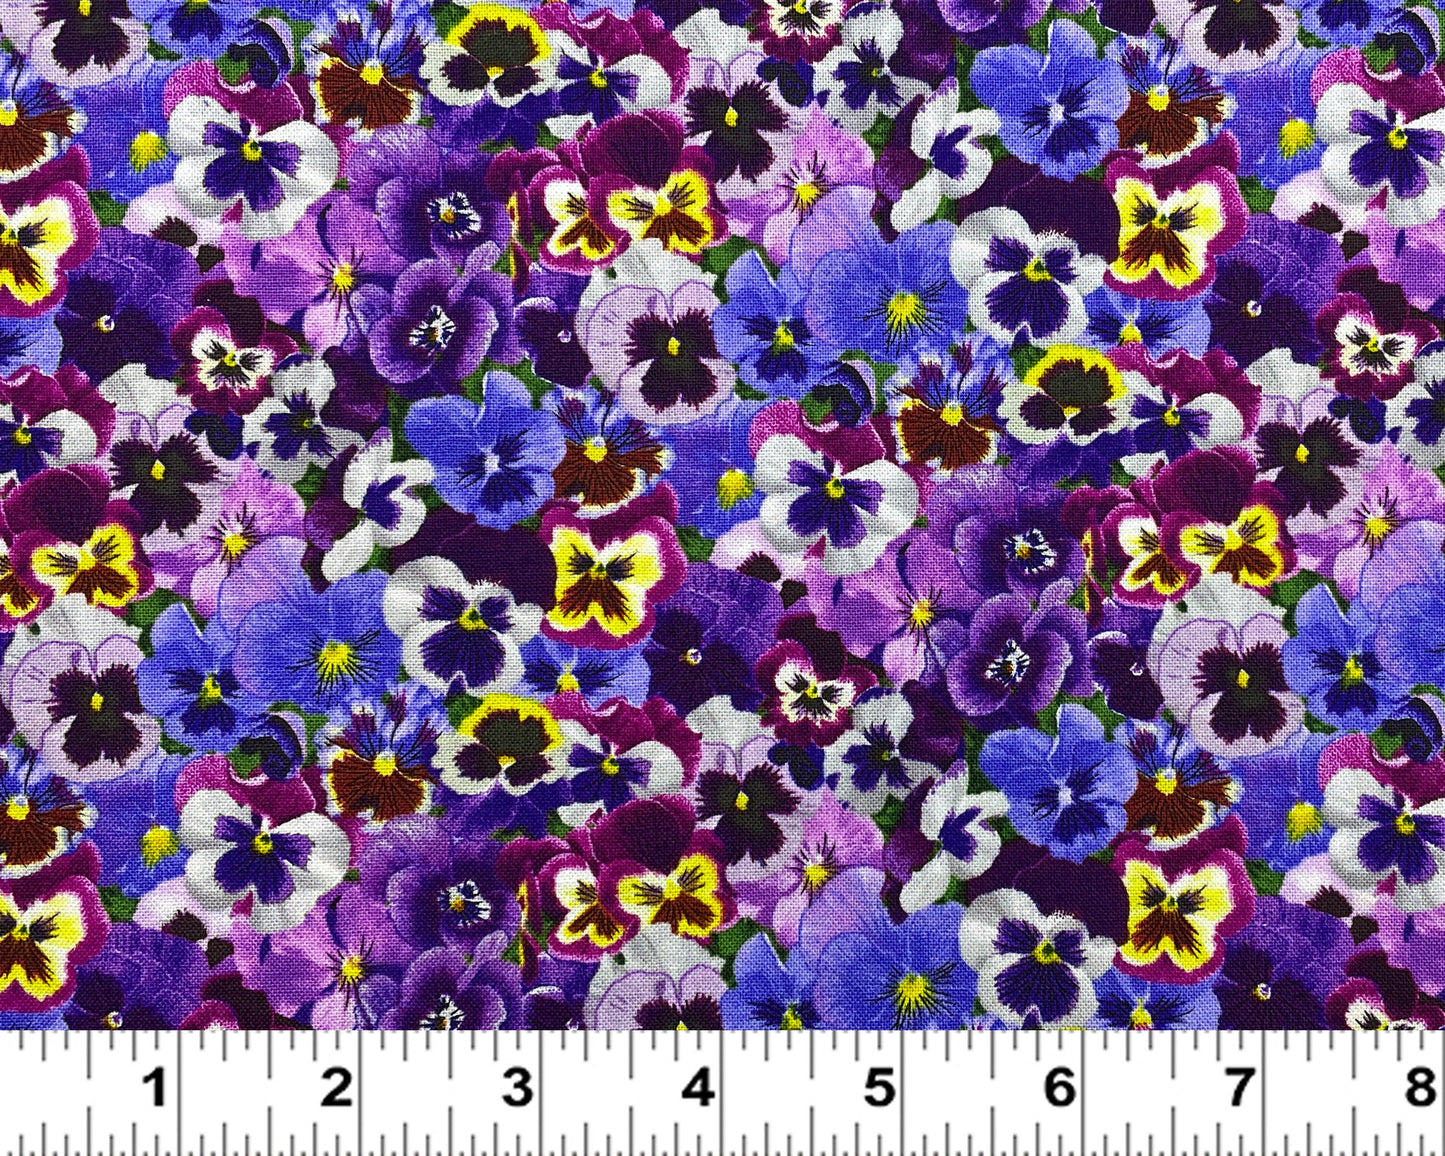 Pansy fabric by the yard - Elizabeth's Studio - 100% cotton - Lovely Pansies fabric floral material purple flowers - SHIPS NEXT DAY